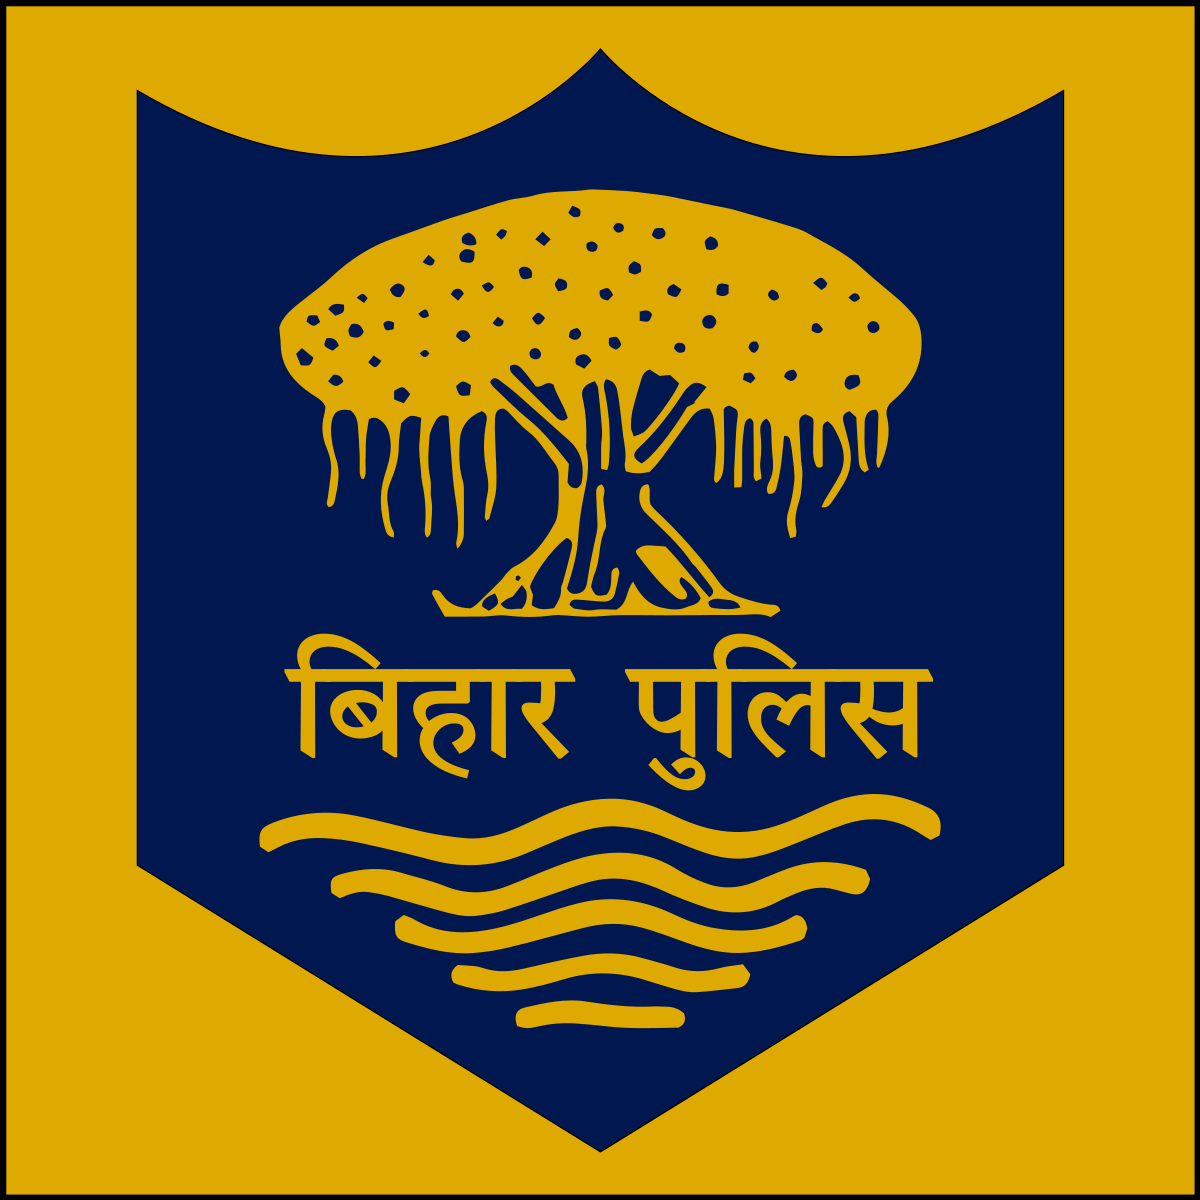 Bihar Police Exam, Recruitment | Model Papers, Result, Dates, Vacancies, Selection, Admit Card, Question Paper and Exam Pattern